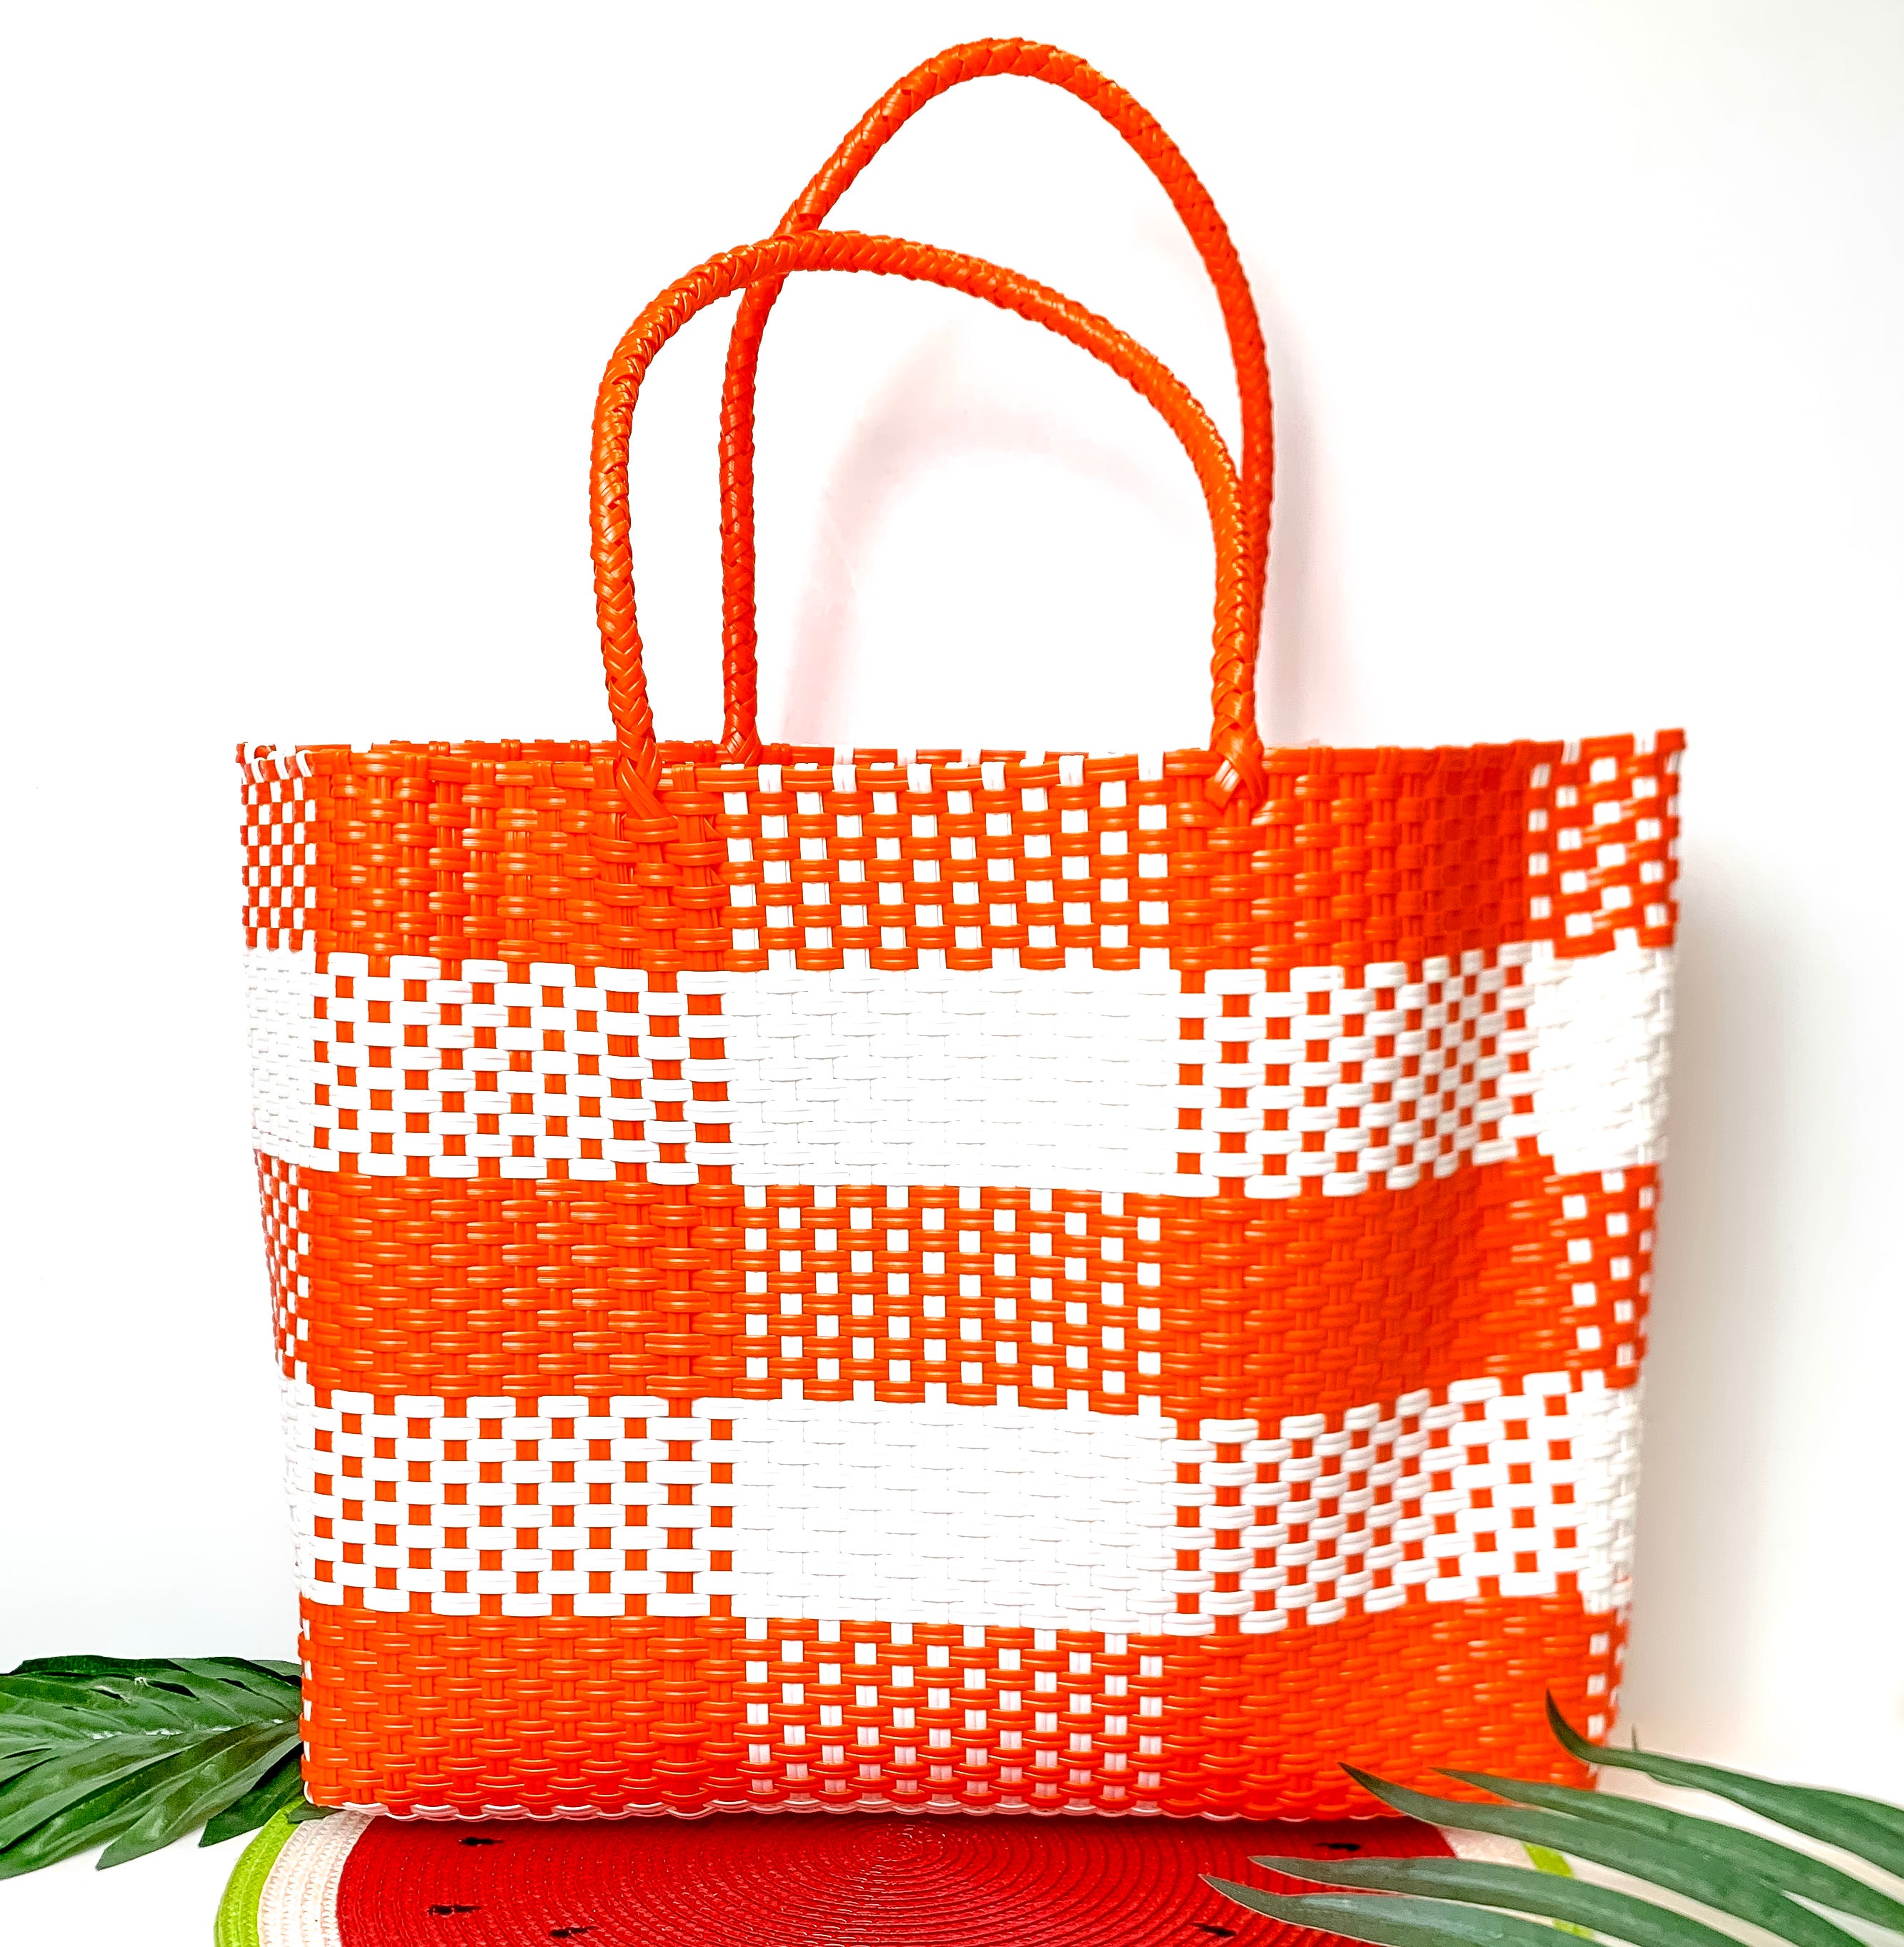 Garden Party Gingham Tote Bag in Orange and White